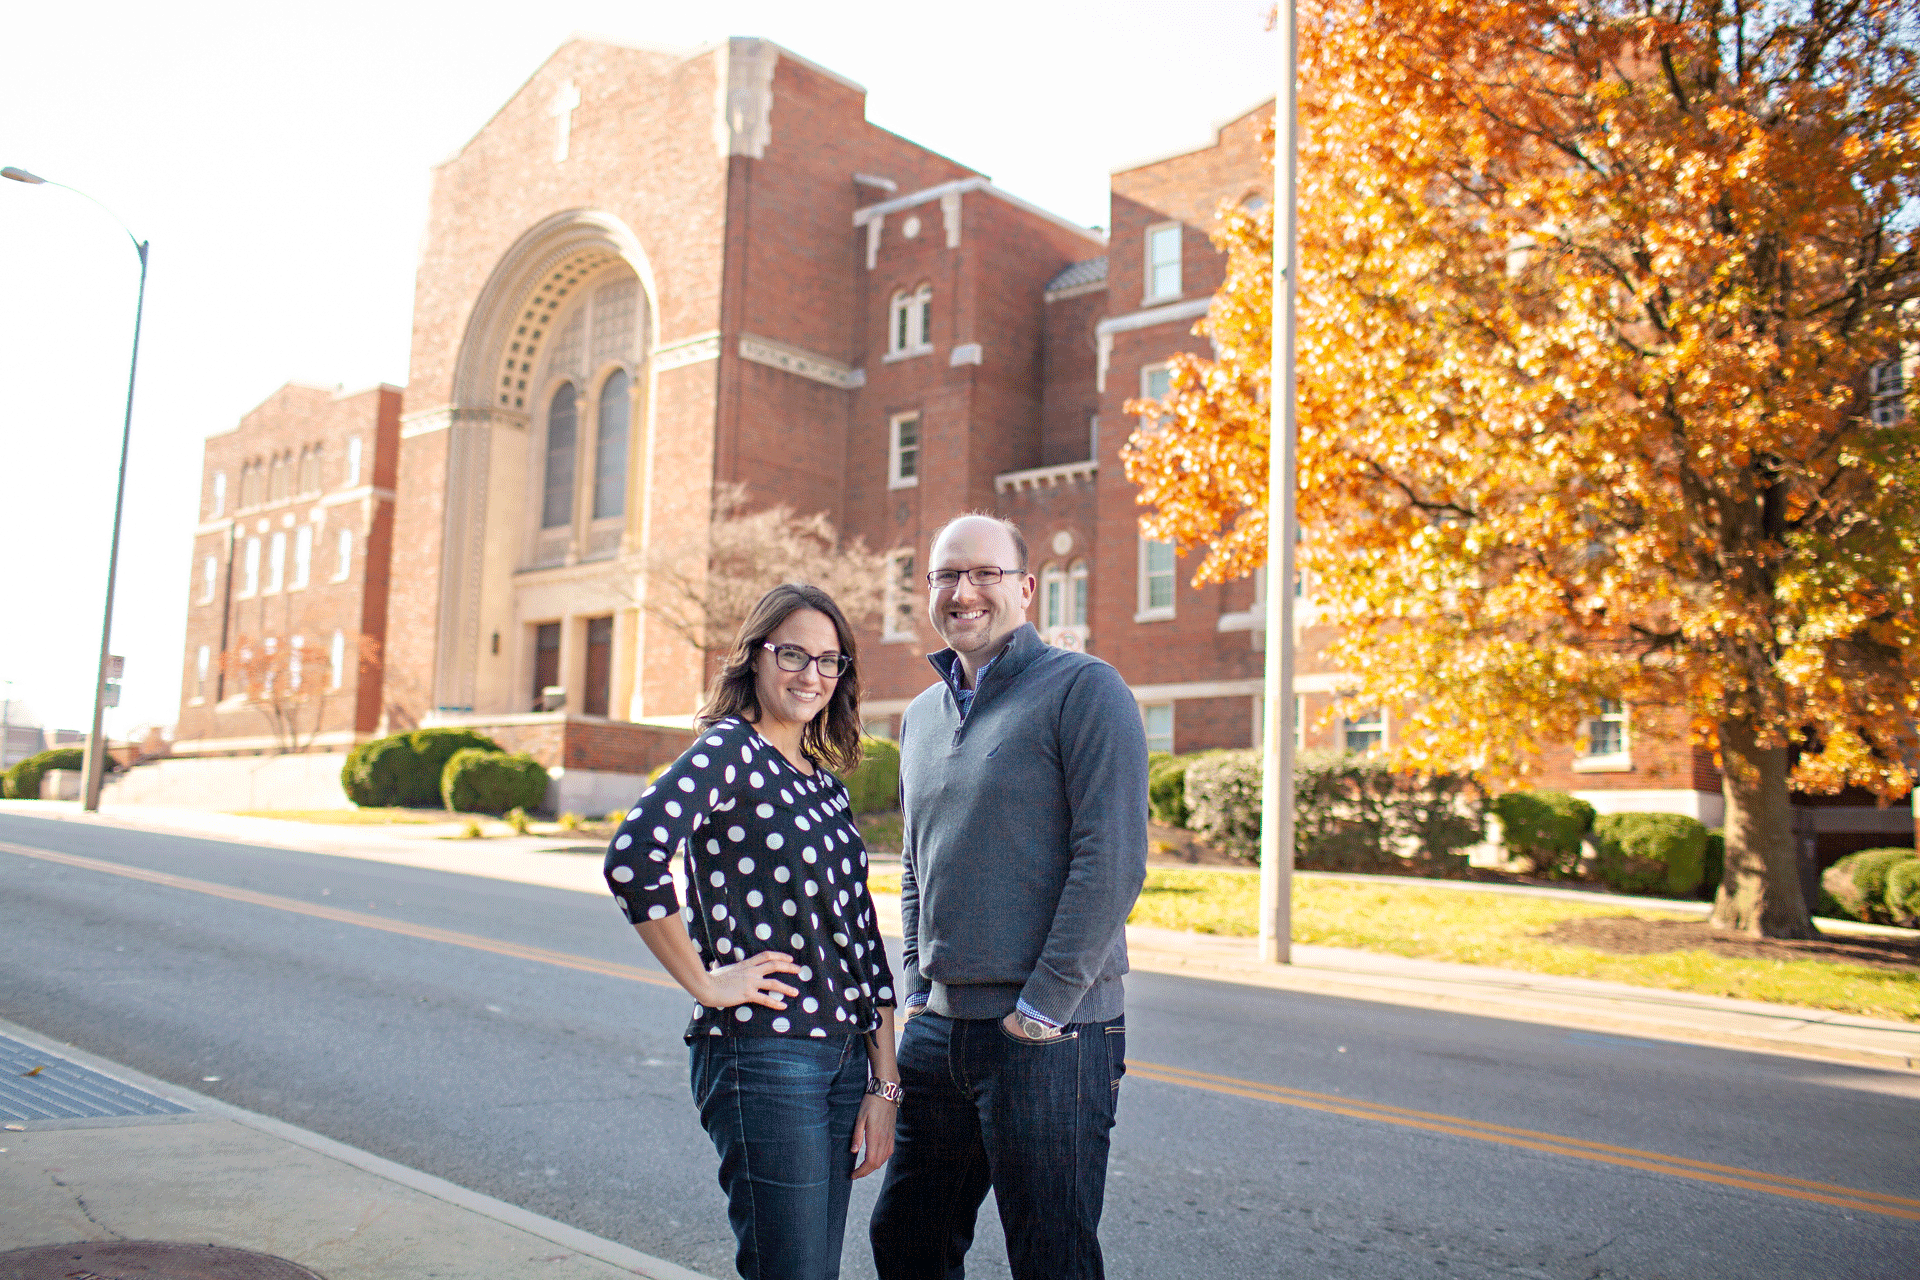 Church Marketing professionals Tyler Harden, CEO, and Tammy Burdick, President, of Firm Foundations Marketing. Photo taken outside in downtown Roanoke city, Virginia